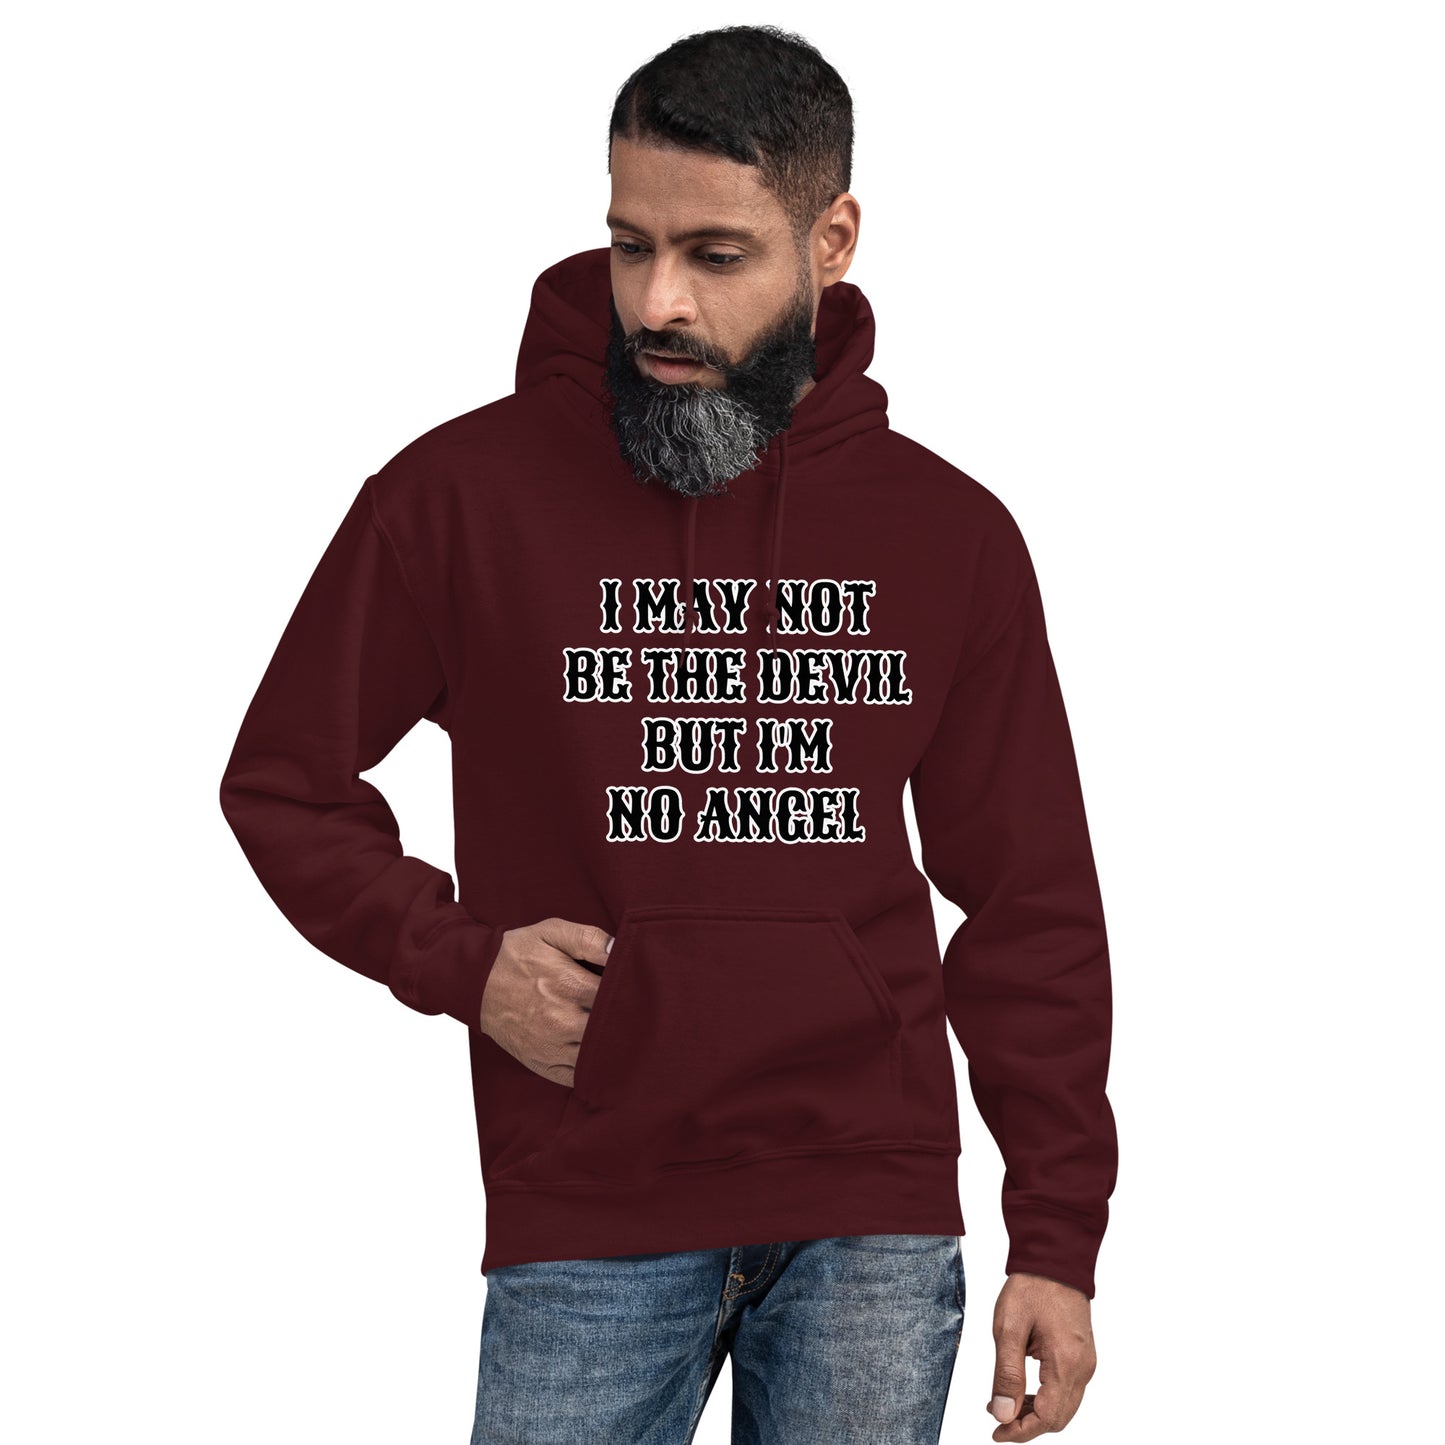 I MAY NOT BE THE DEVIL BUT I'M NO ANGEL- Unisex Hoodie